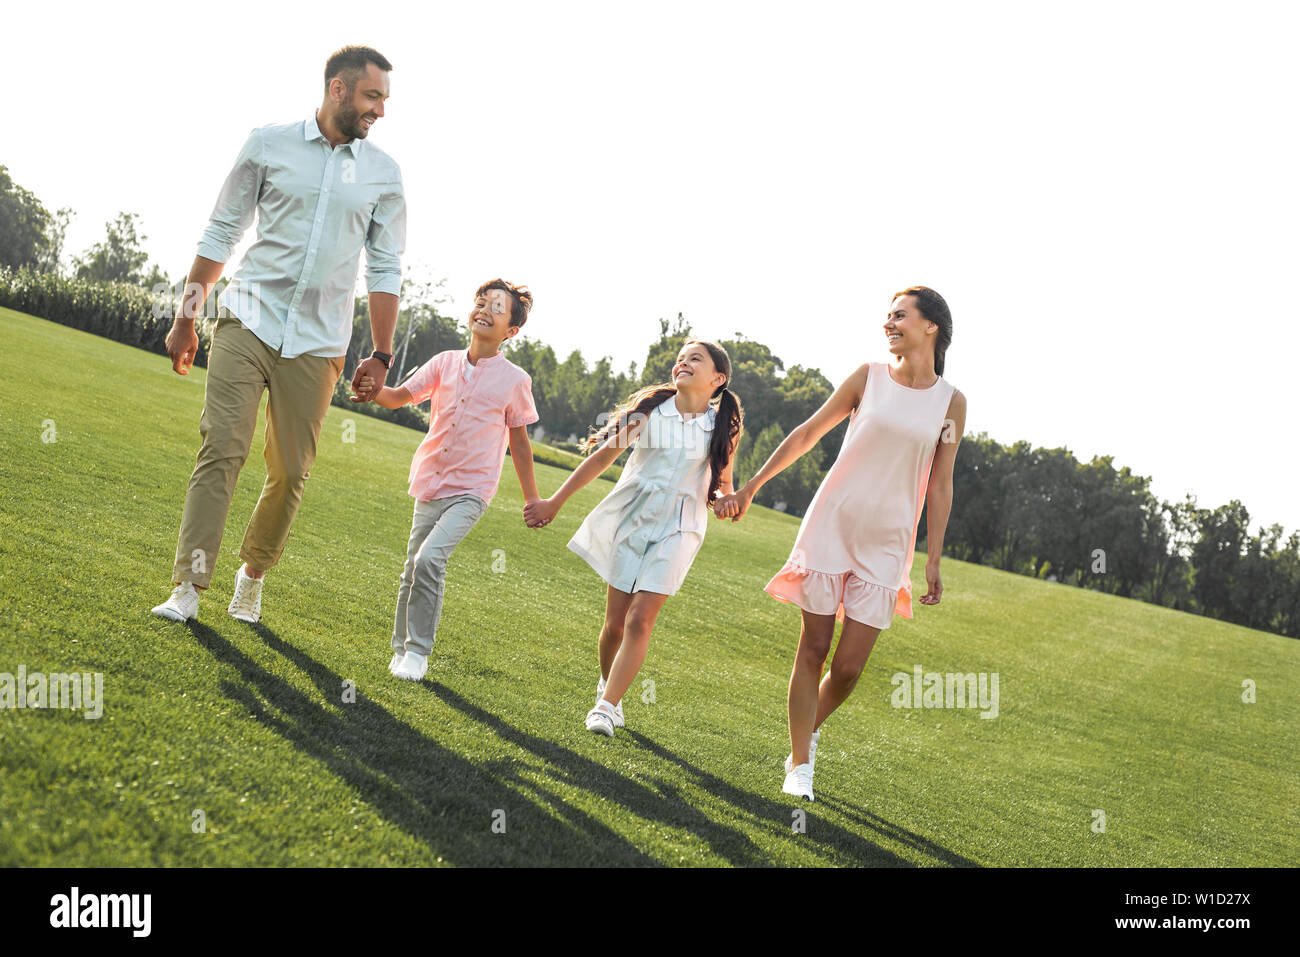 We are happy together Full length of positive and young family of four holding hands, smiling and walking outdoors . Picnic. Weekend Stock Photo